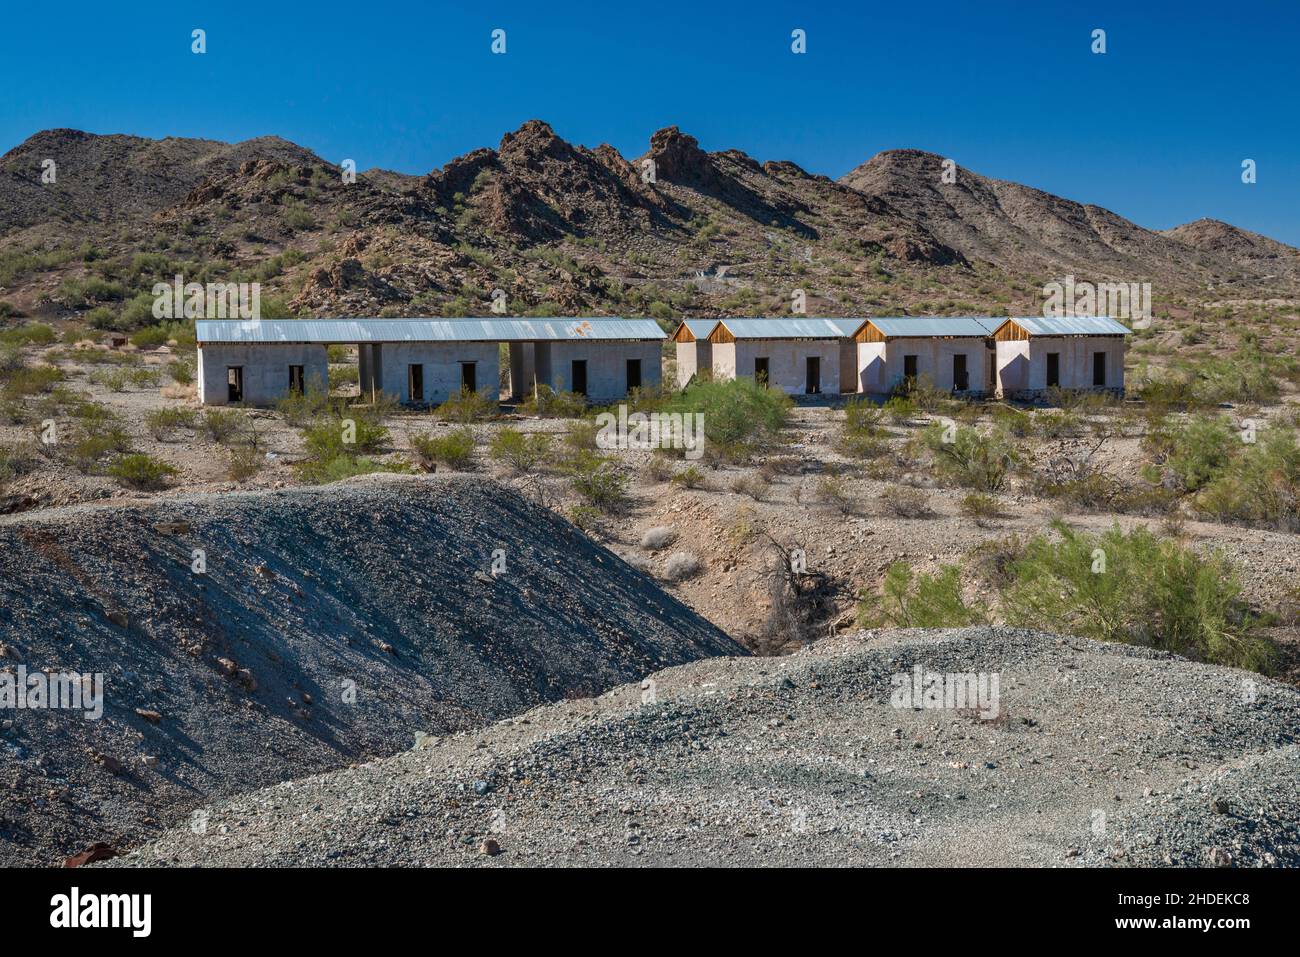 Workers cottages, 1917, partially restored, waste rock tailings at Swansea copper mining townsite, Buckskin Mountains, Sonoran Desert, Arizona, USA Stock Photo